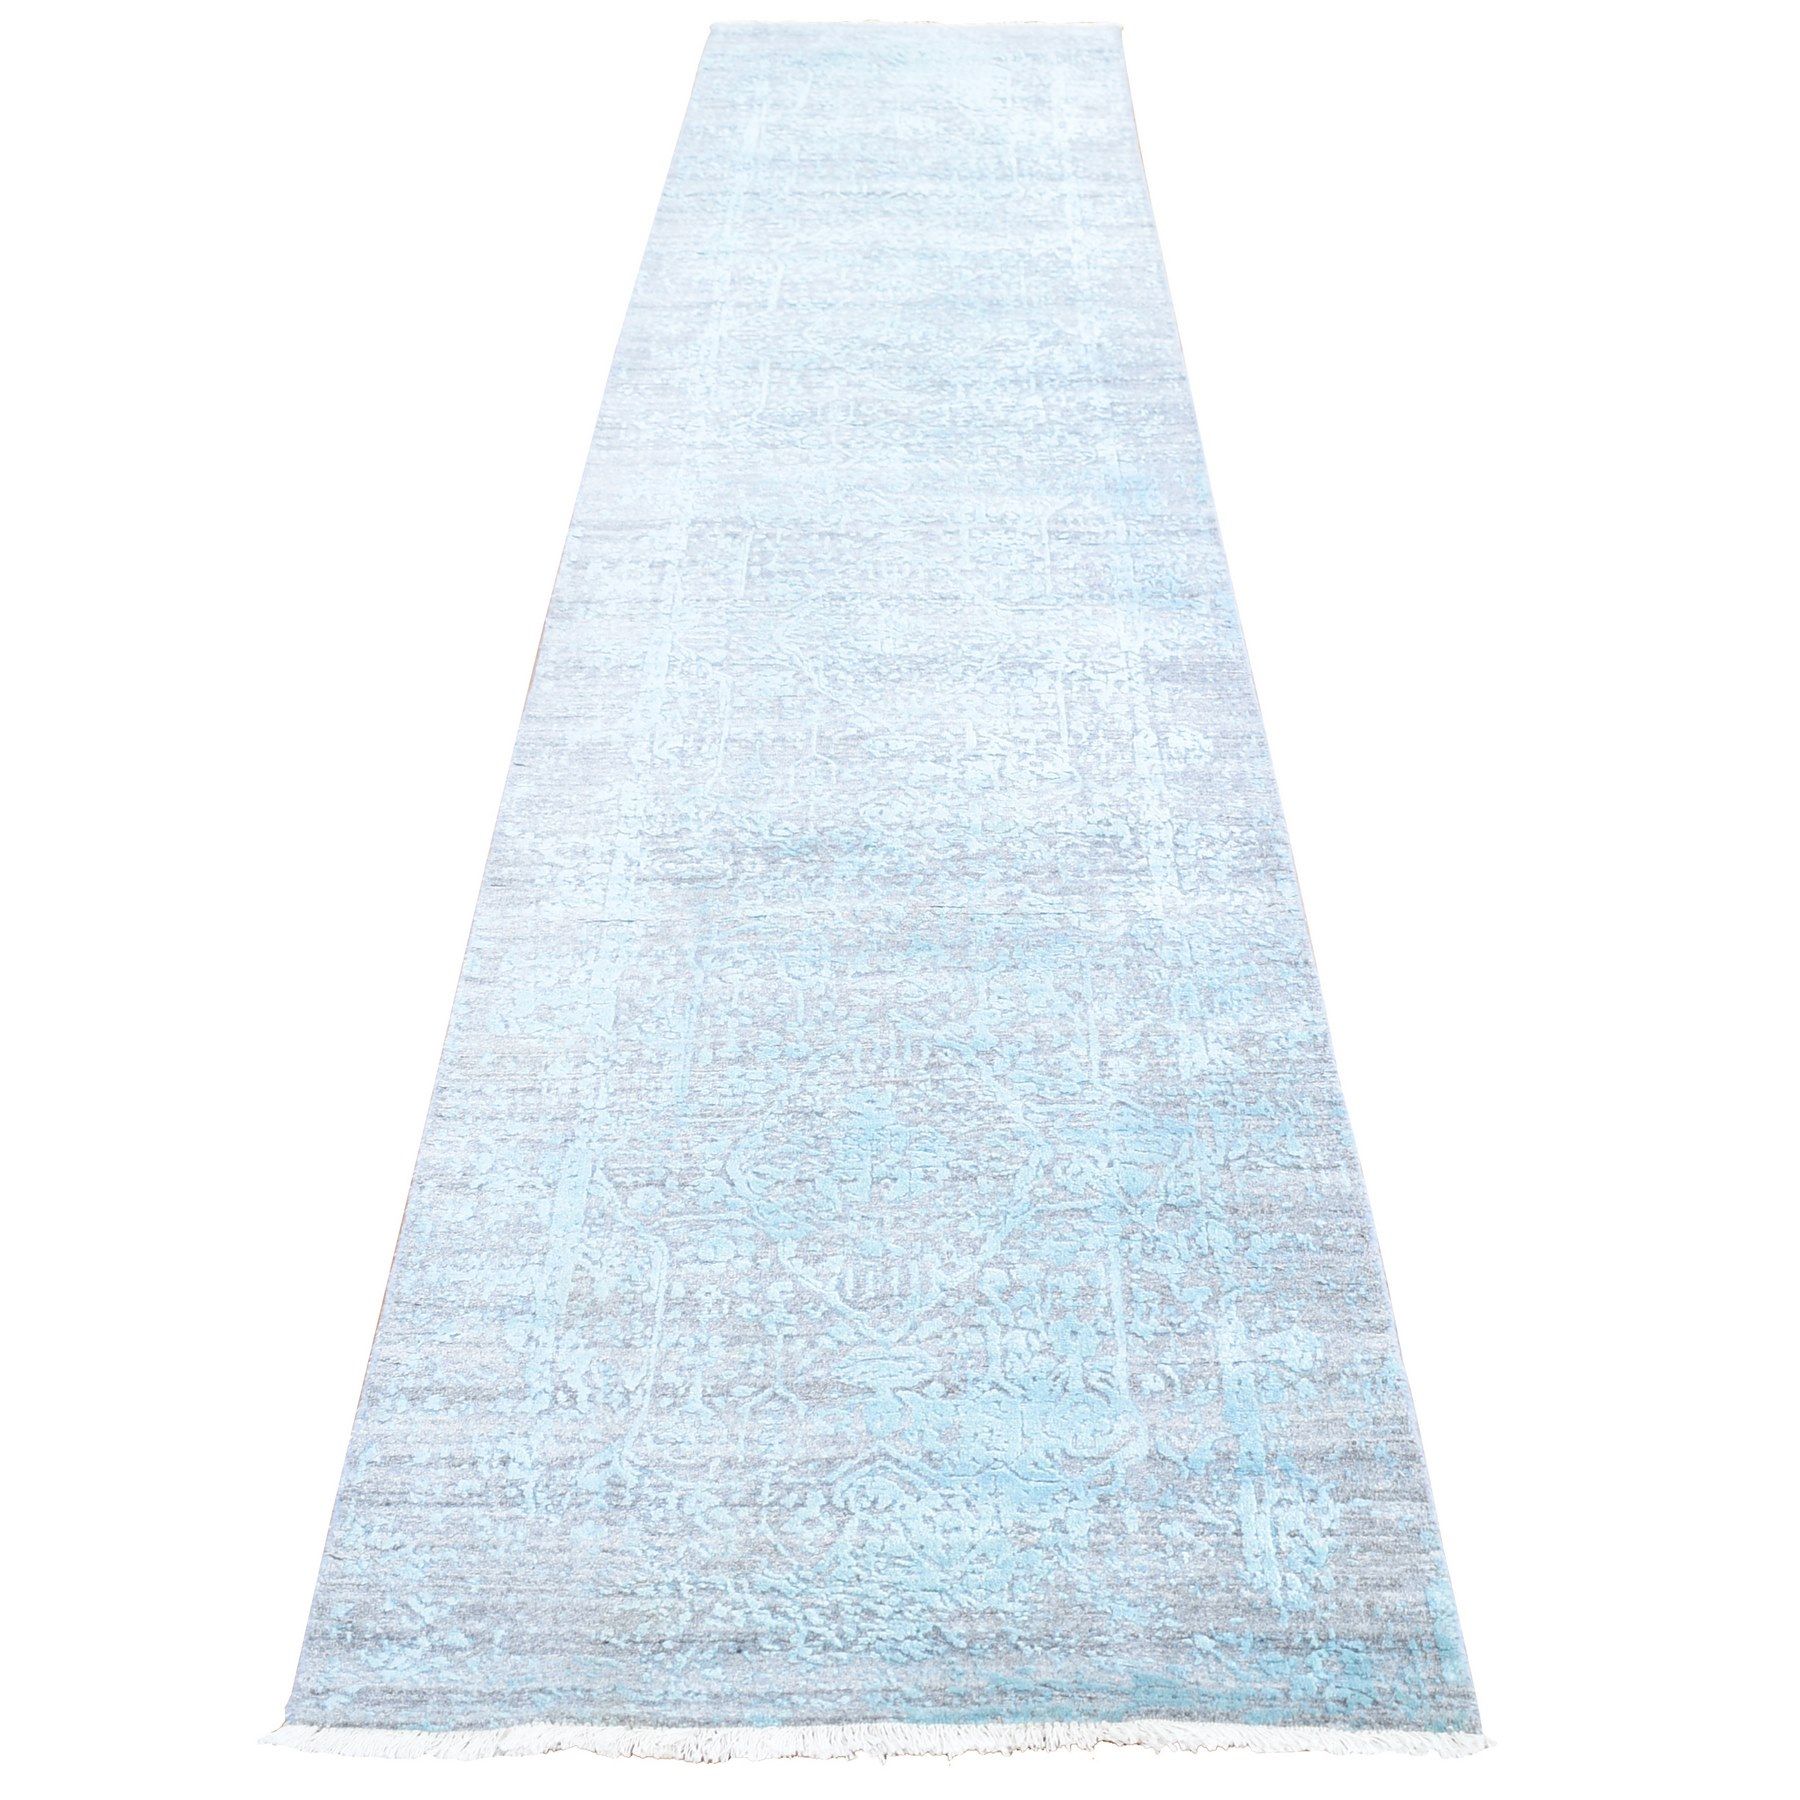 2'7"X14' Light Blue Wool And Pure Silk Hand Knotted Broken Persian Design  Oriental Xl Runner Rug – Carpets & Rugs Within Light Blue Runner Rugs (View 14 of 15)